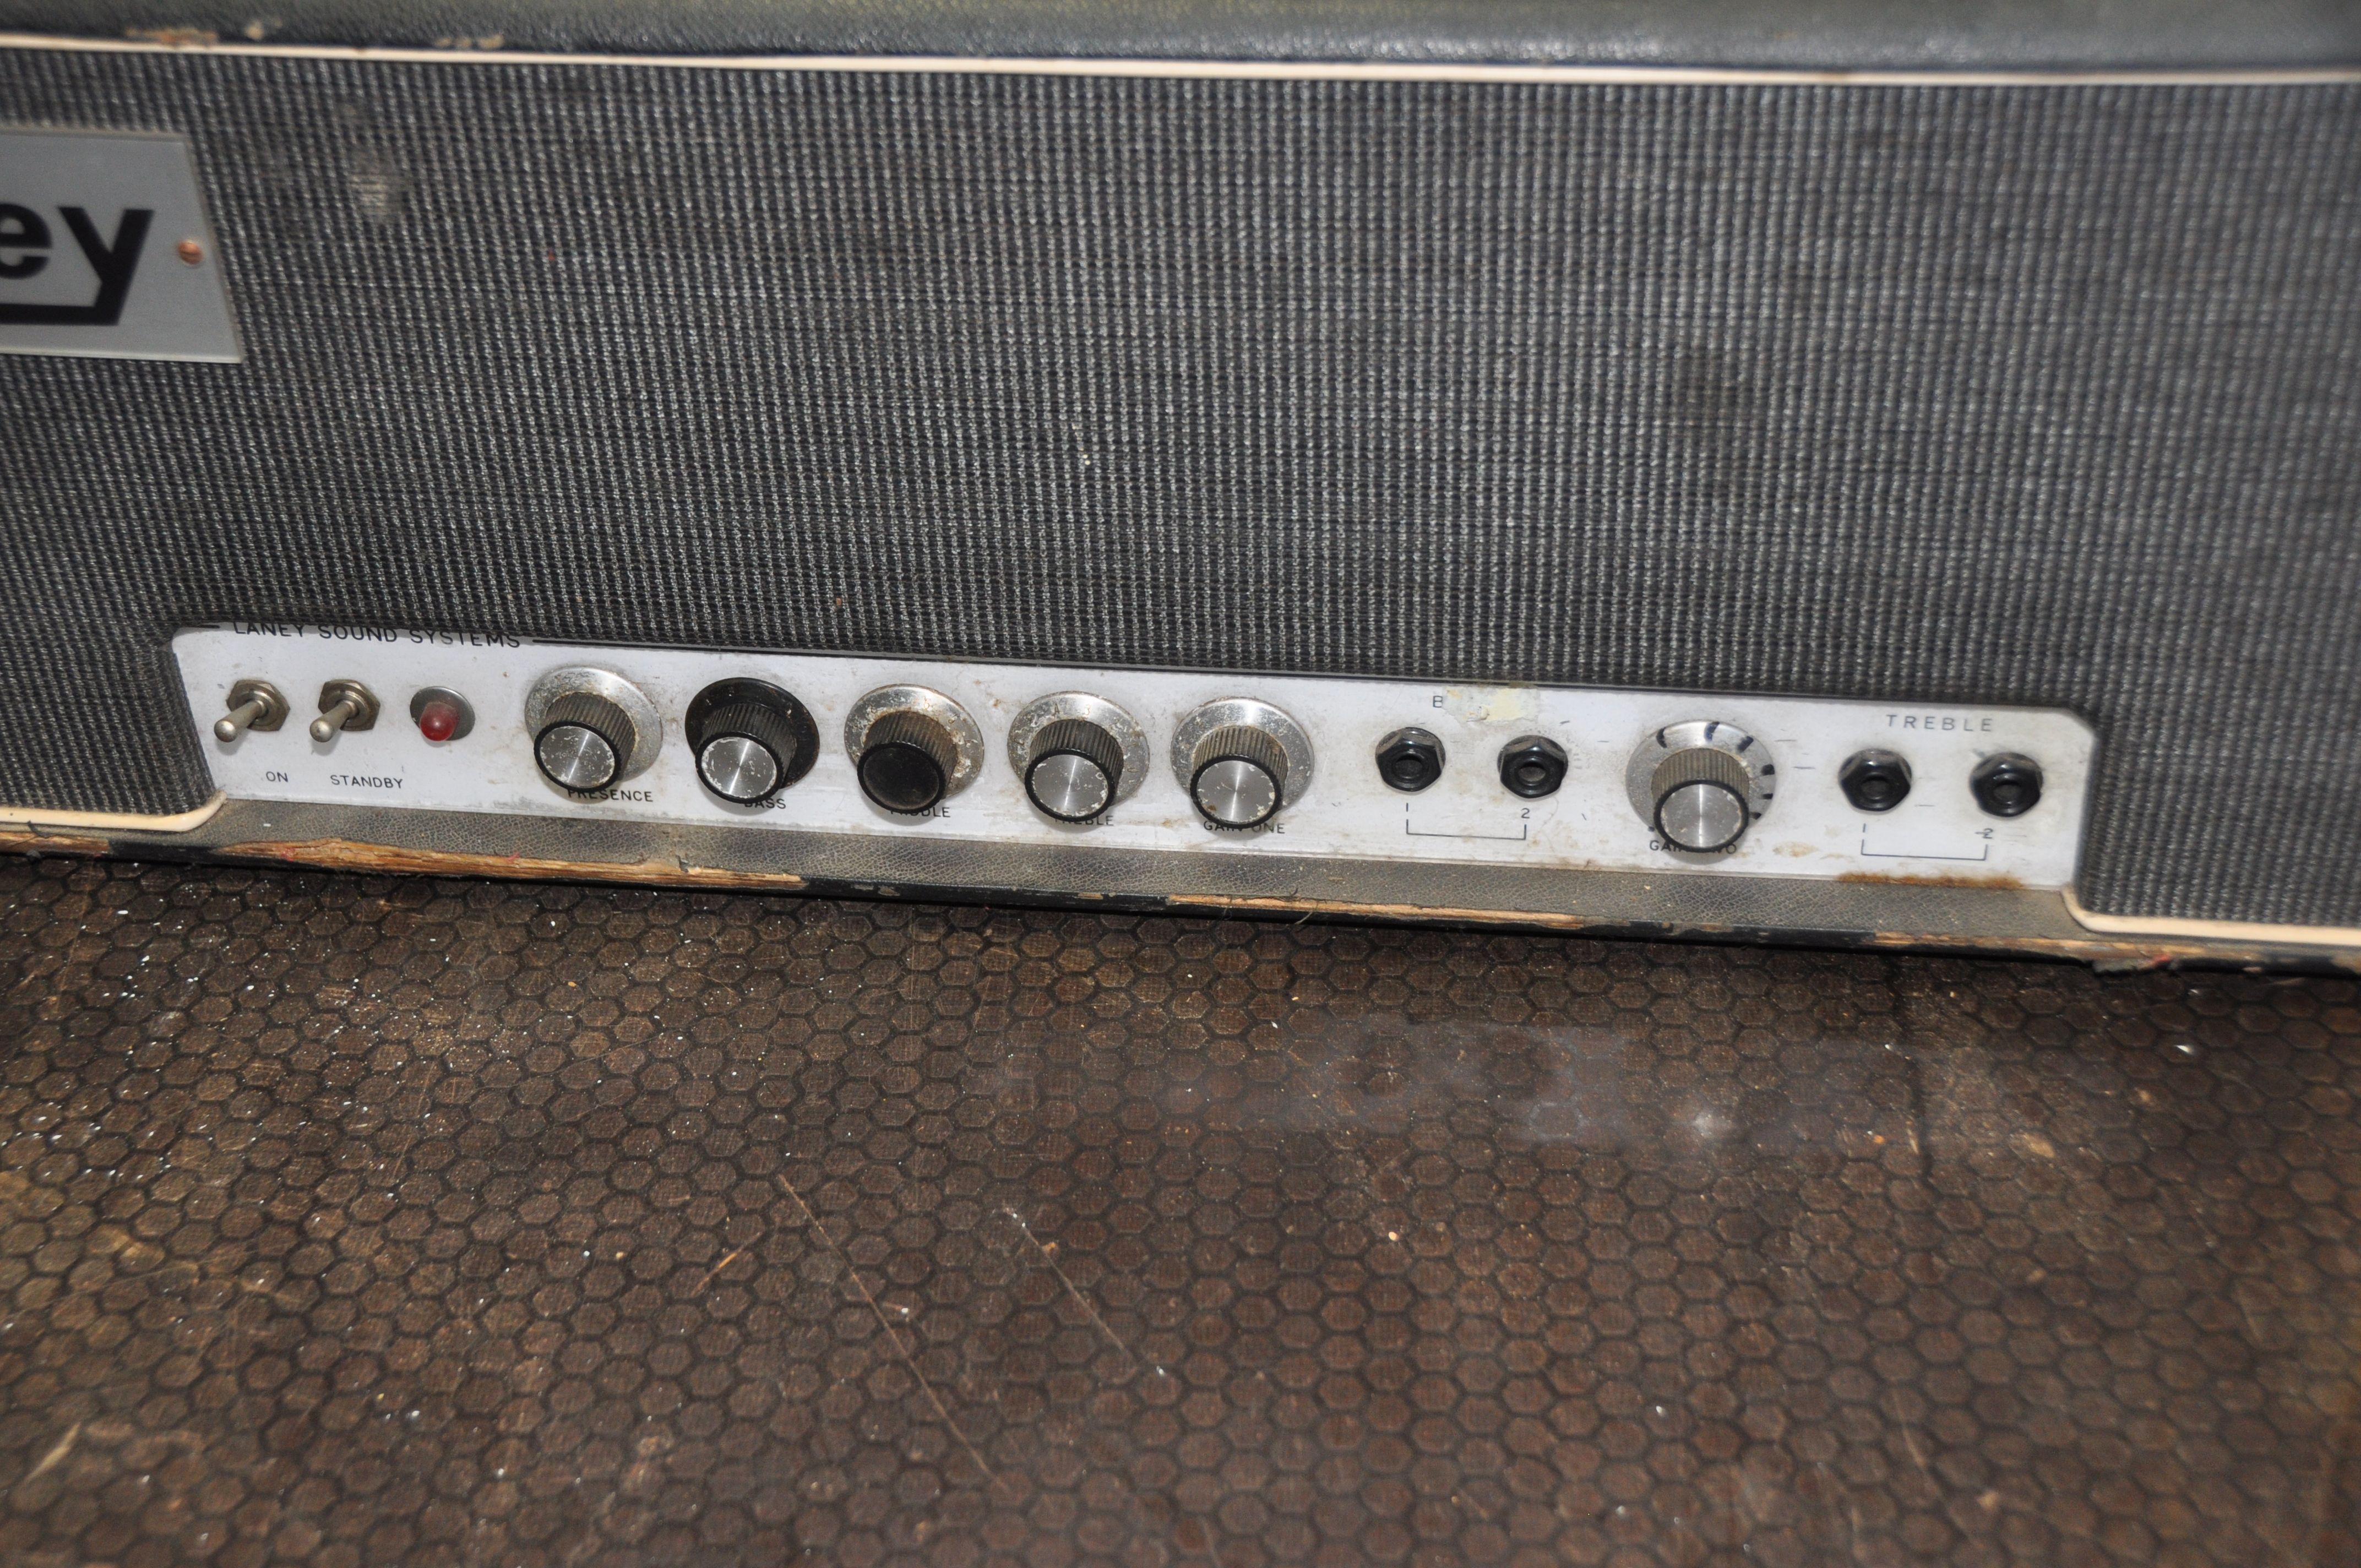 AN EARLY LANEY 100 WATT VALVE GUITAR AMPLIFIER HEAD Serial Number 326 (no power cable so UNTESTED)( - Bild 2 aus 6